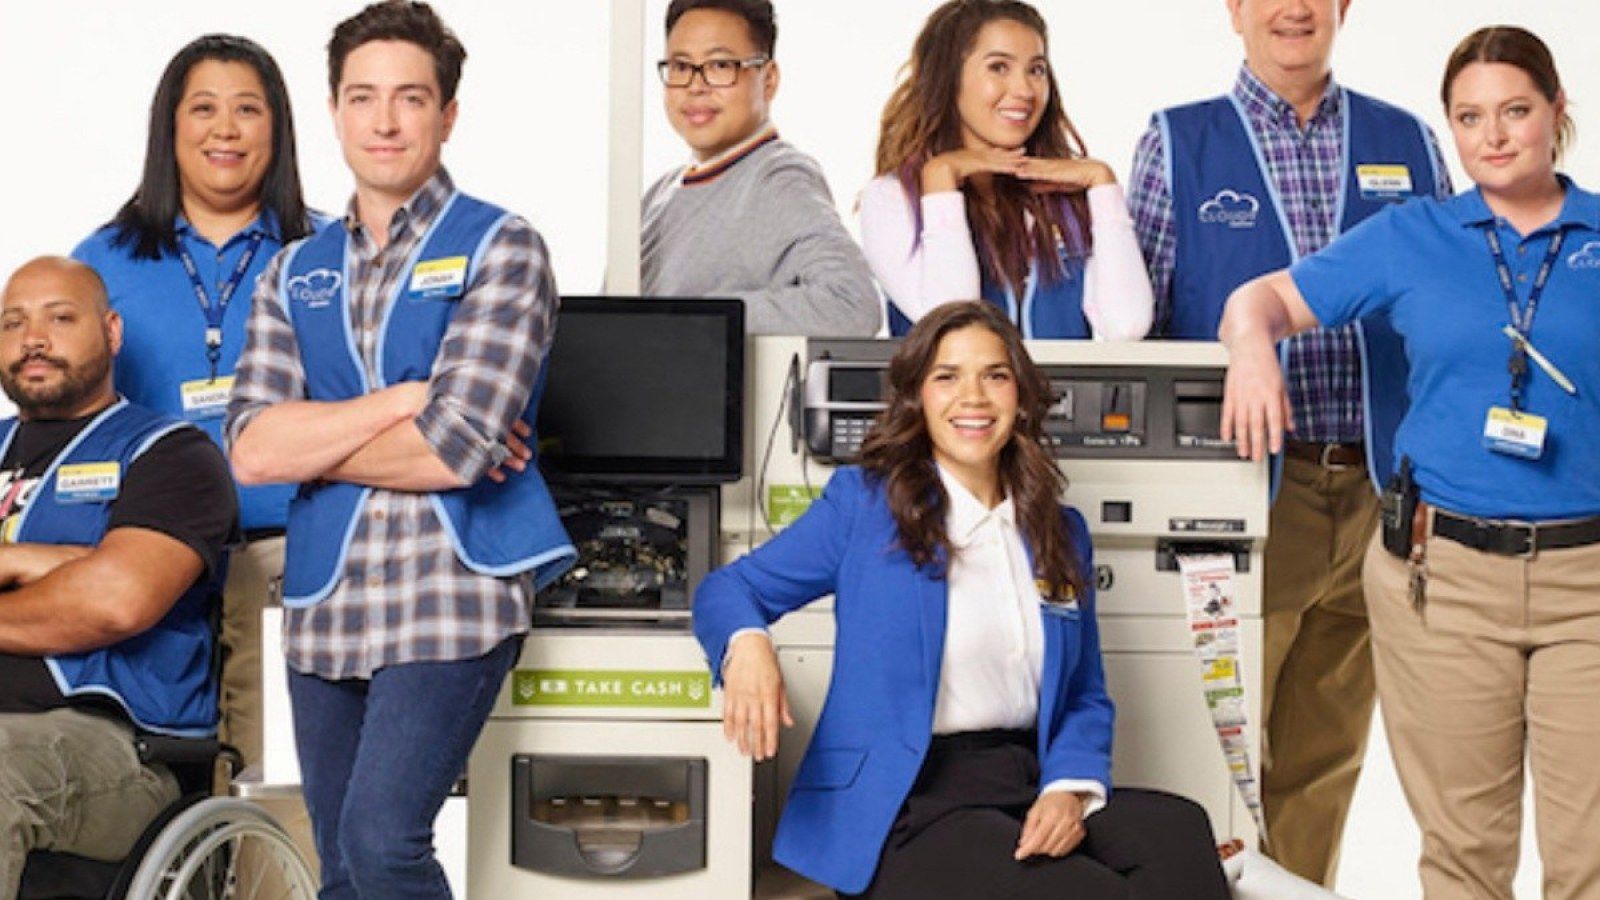 Superstore' Canceled: Cast React As They Film Final Episode